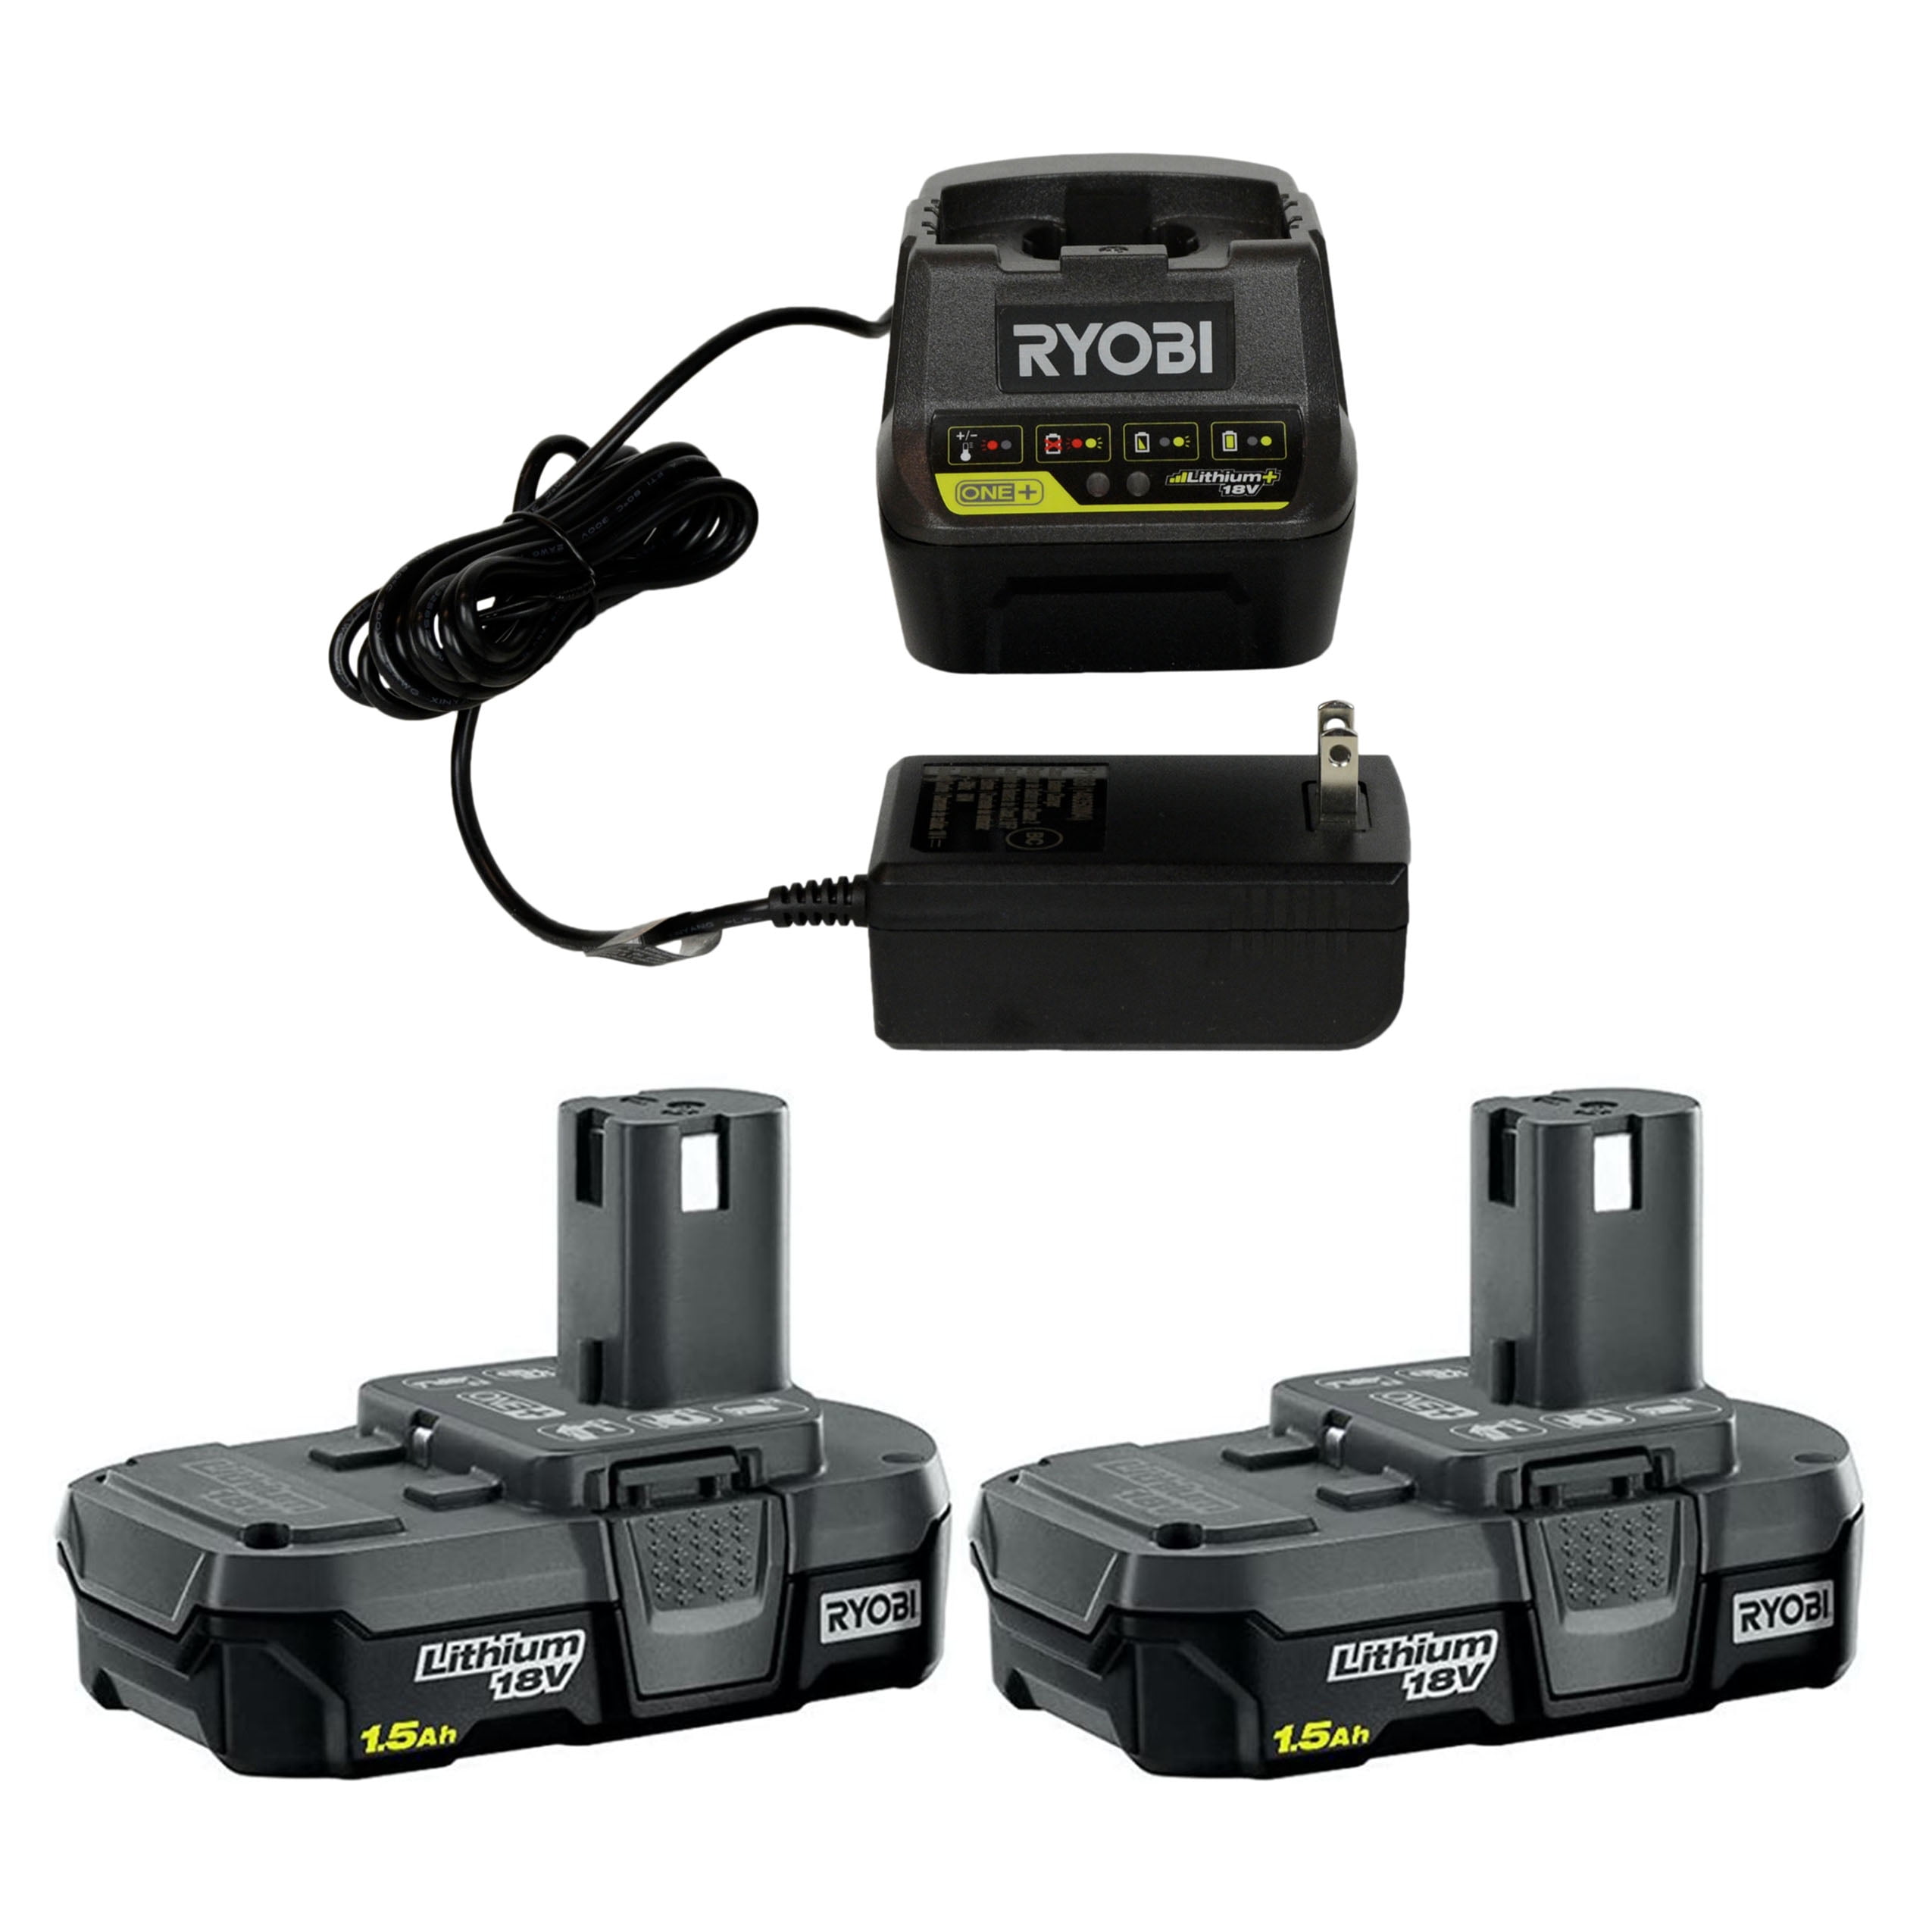 Ryobi Lithium 18v Battery Charger Hotsell, 56% OFF 